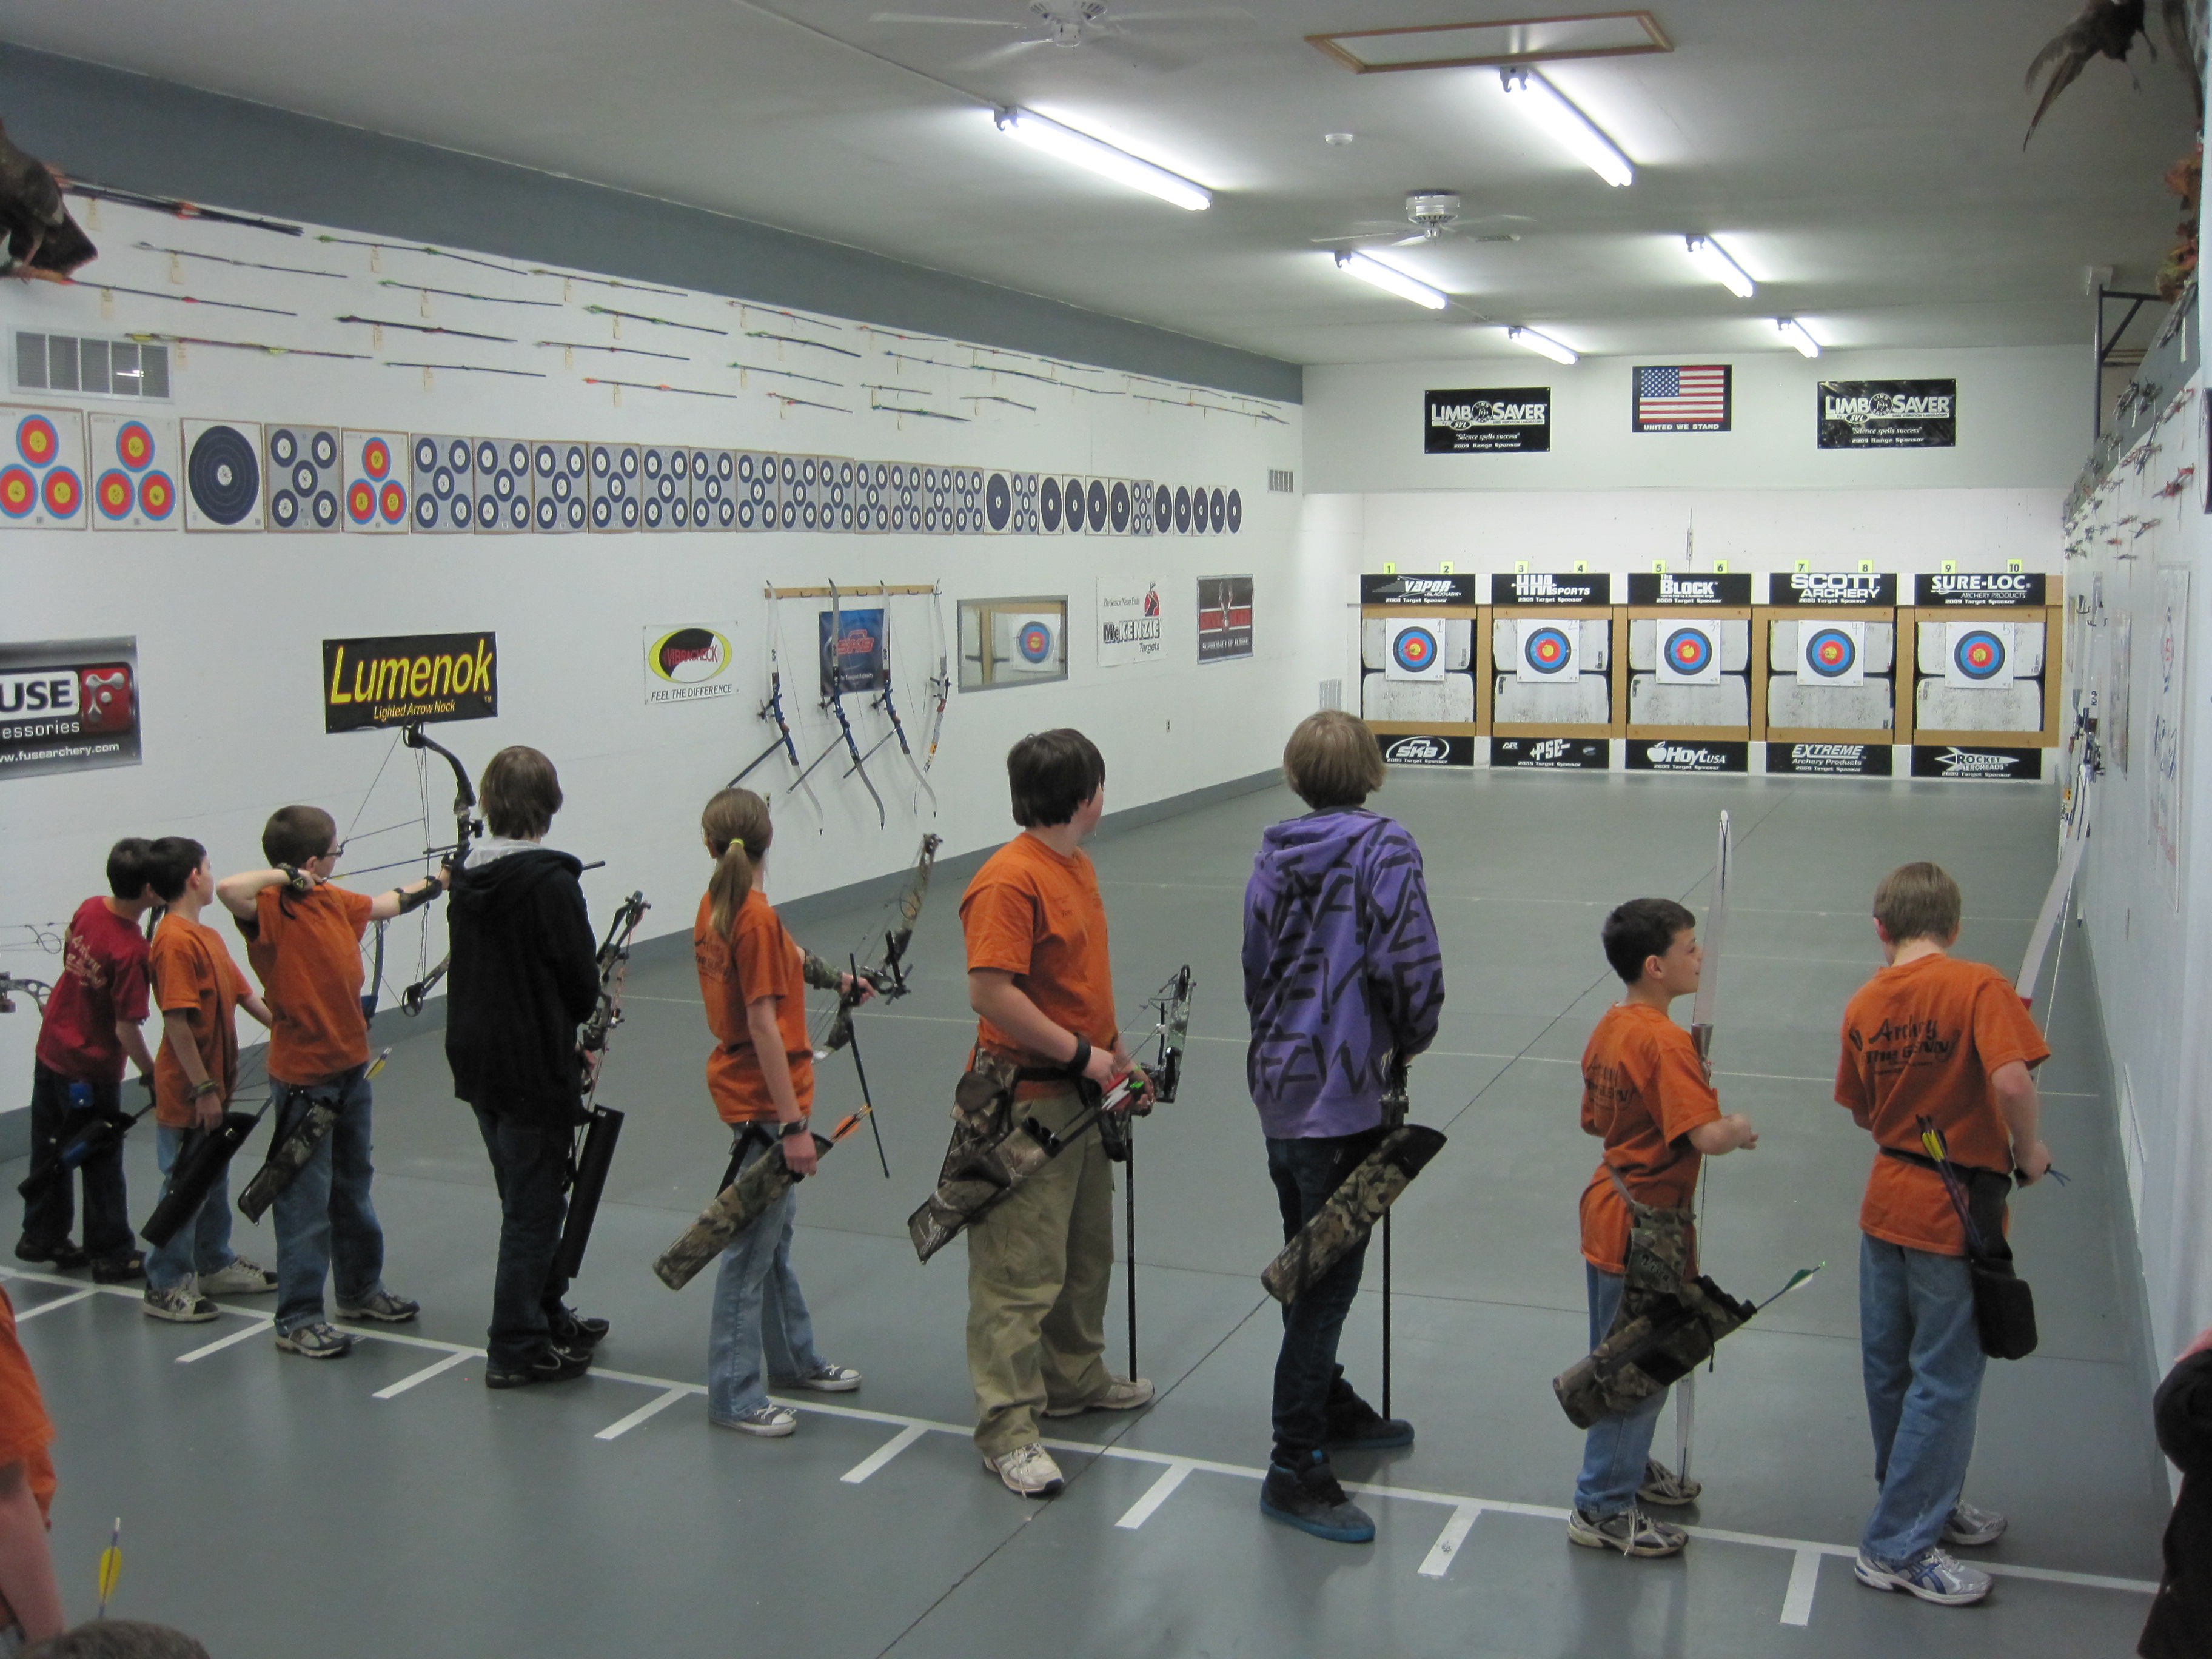 Our archery leagues serve adult women and men and kids in the Lehigh Valley